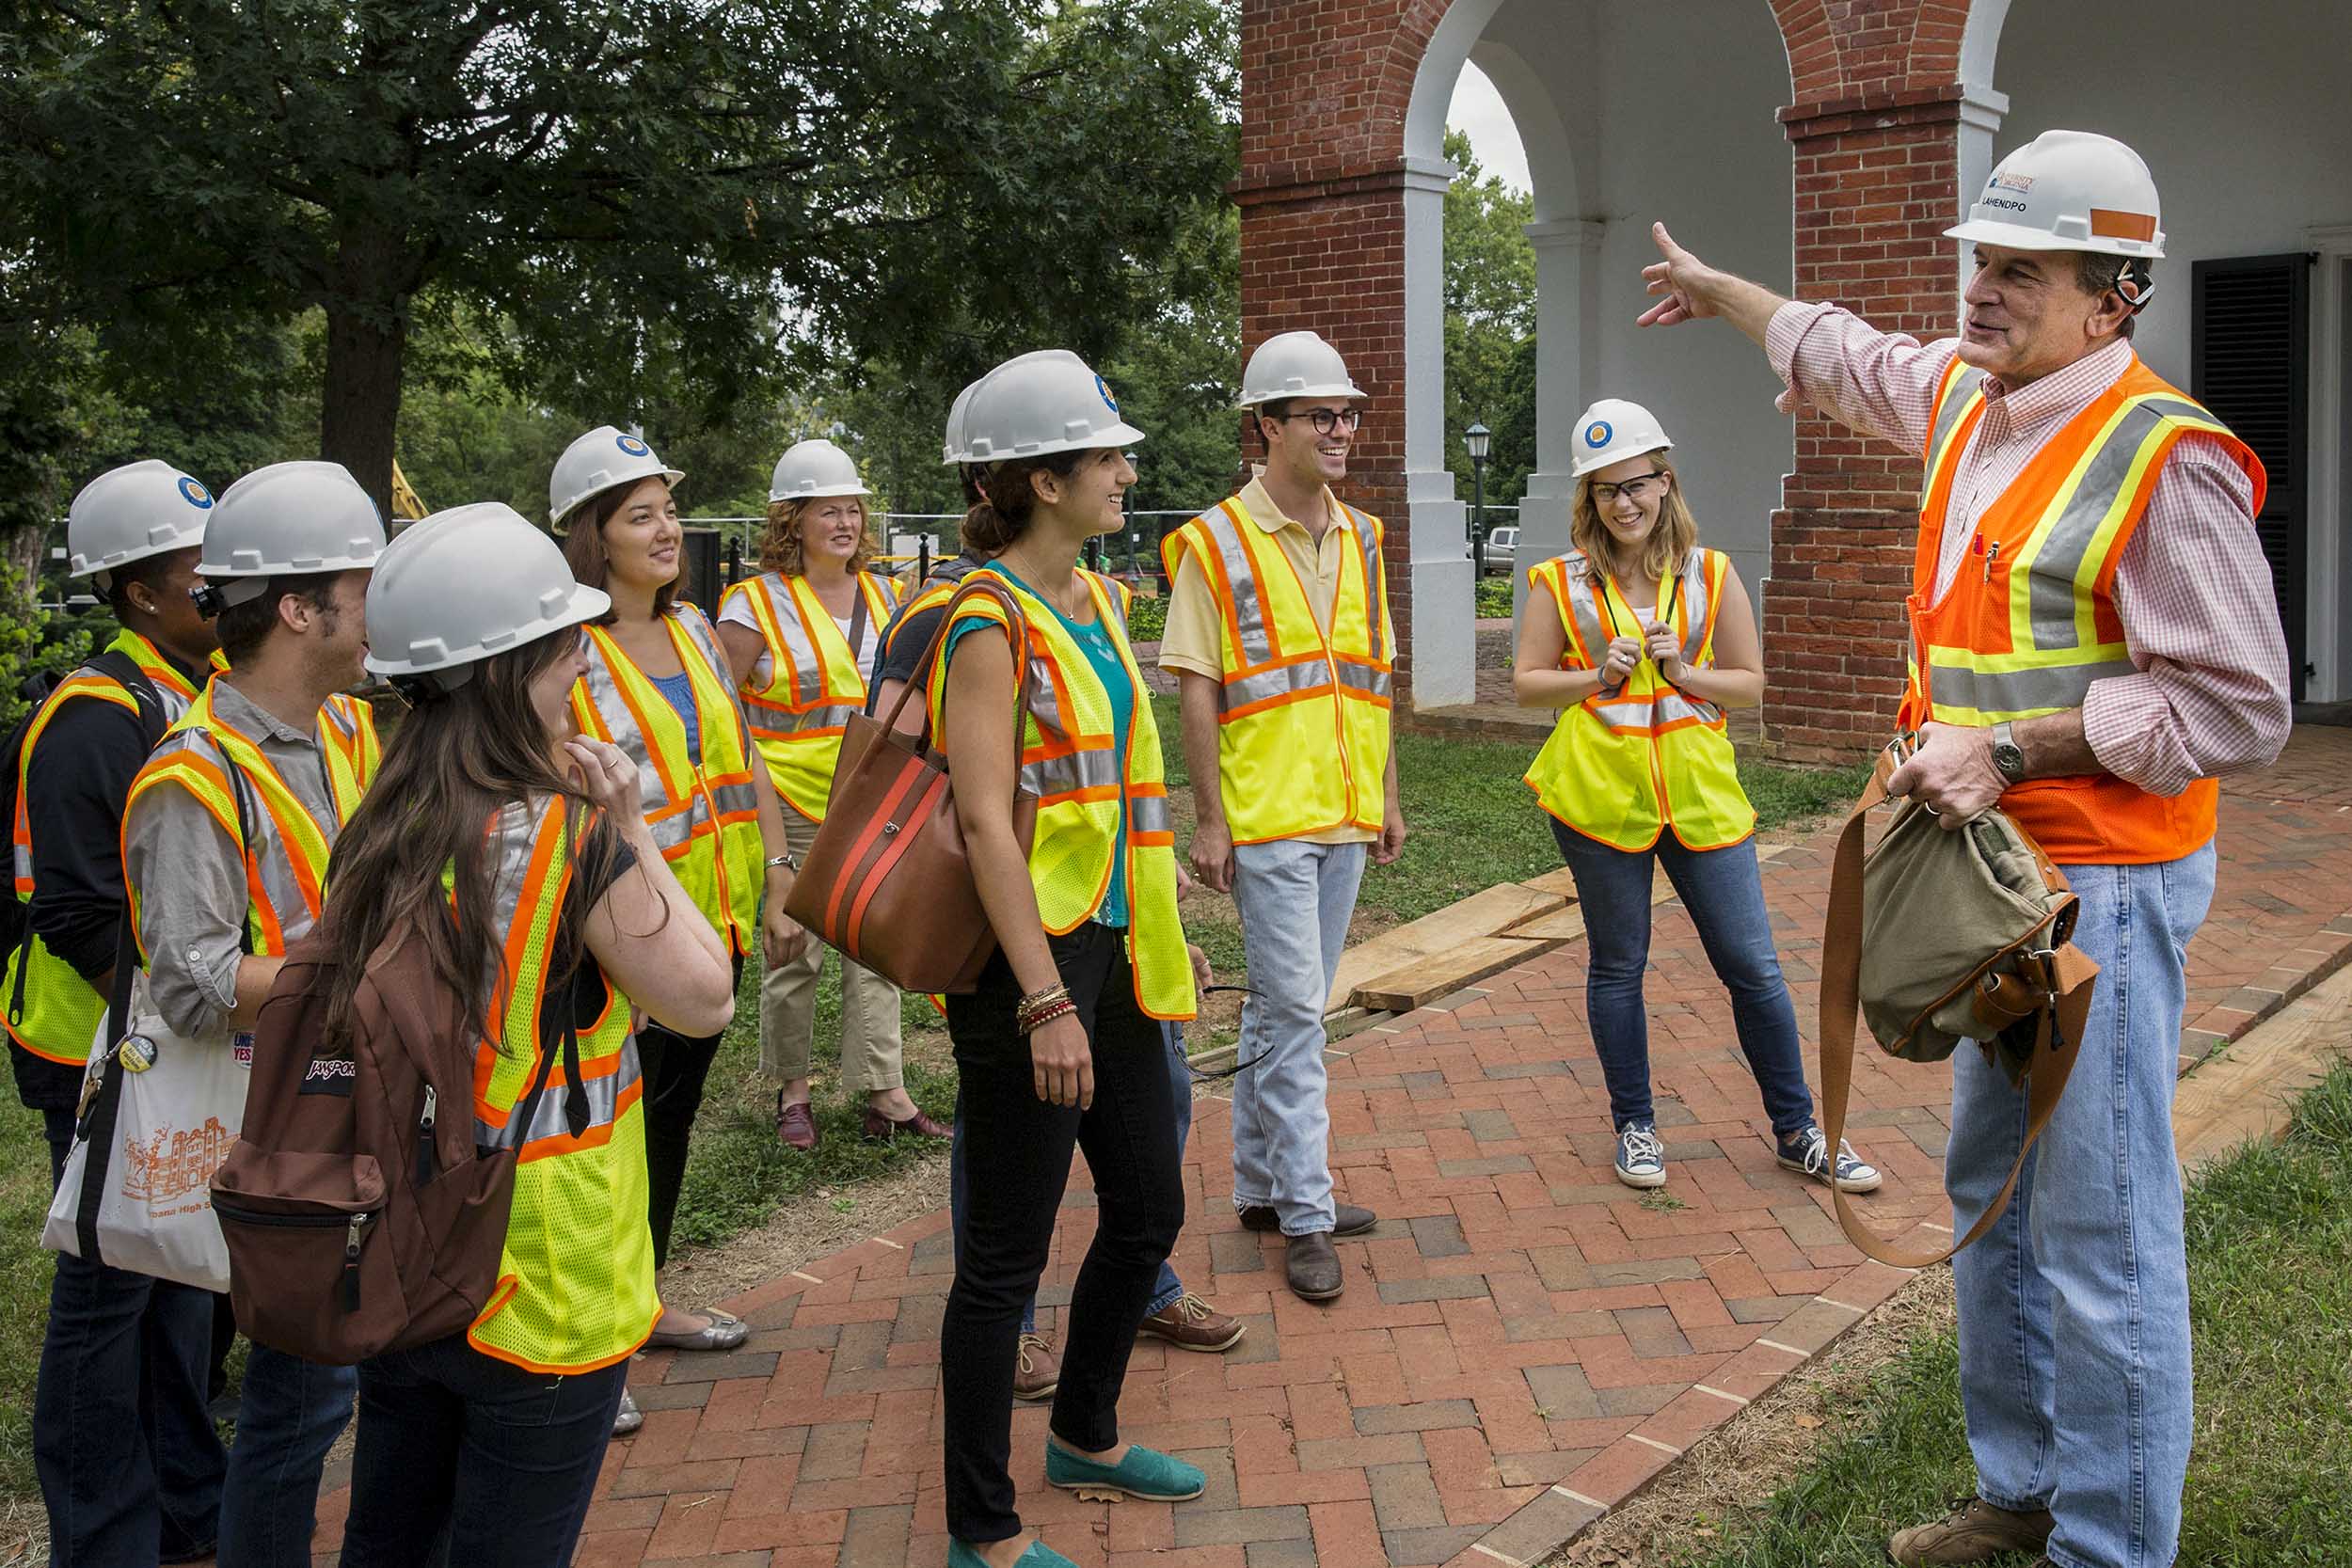 Jody Lahendro in construction hat and vests talkings to a group of students who are also dressed in construction hats and vests